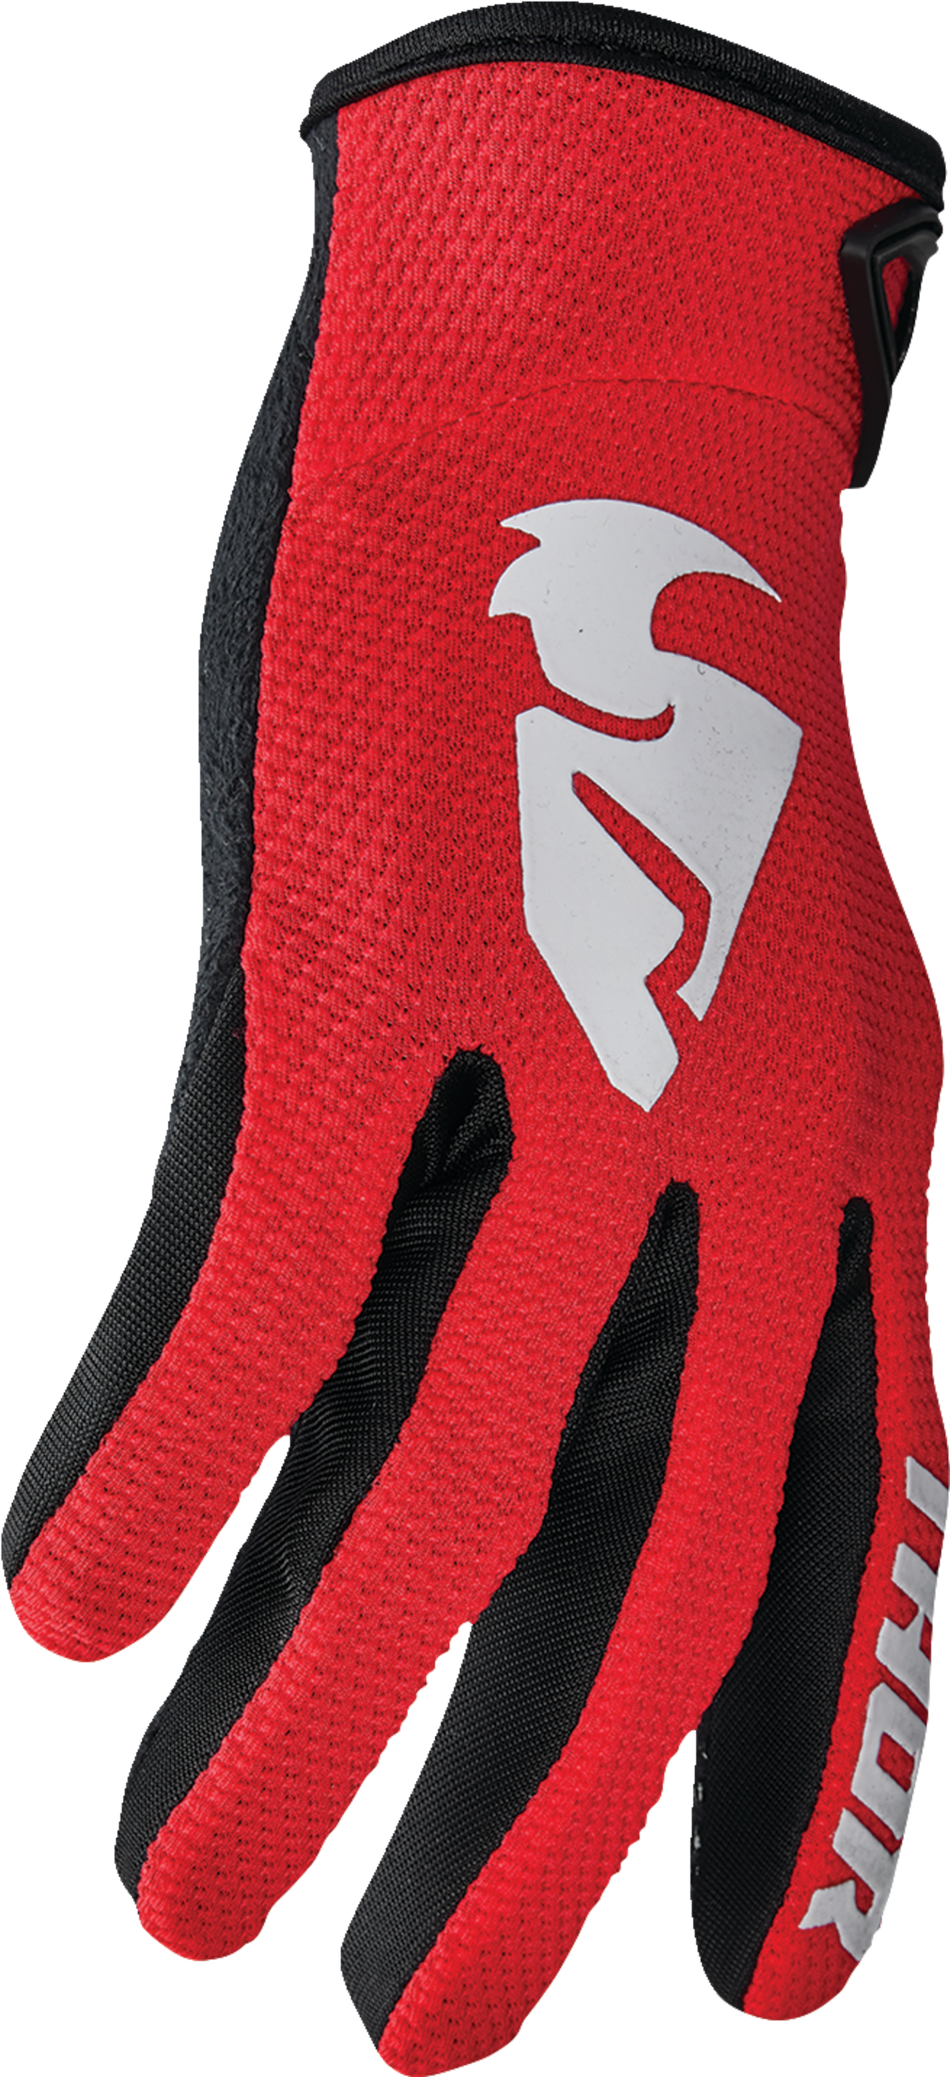 THOR Sector Gloves - Red/White - Large 3330-7270